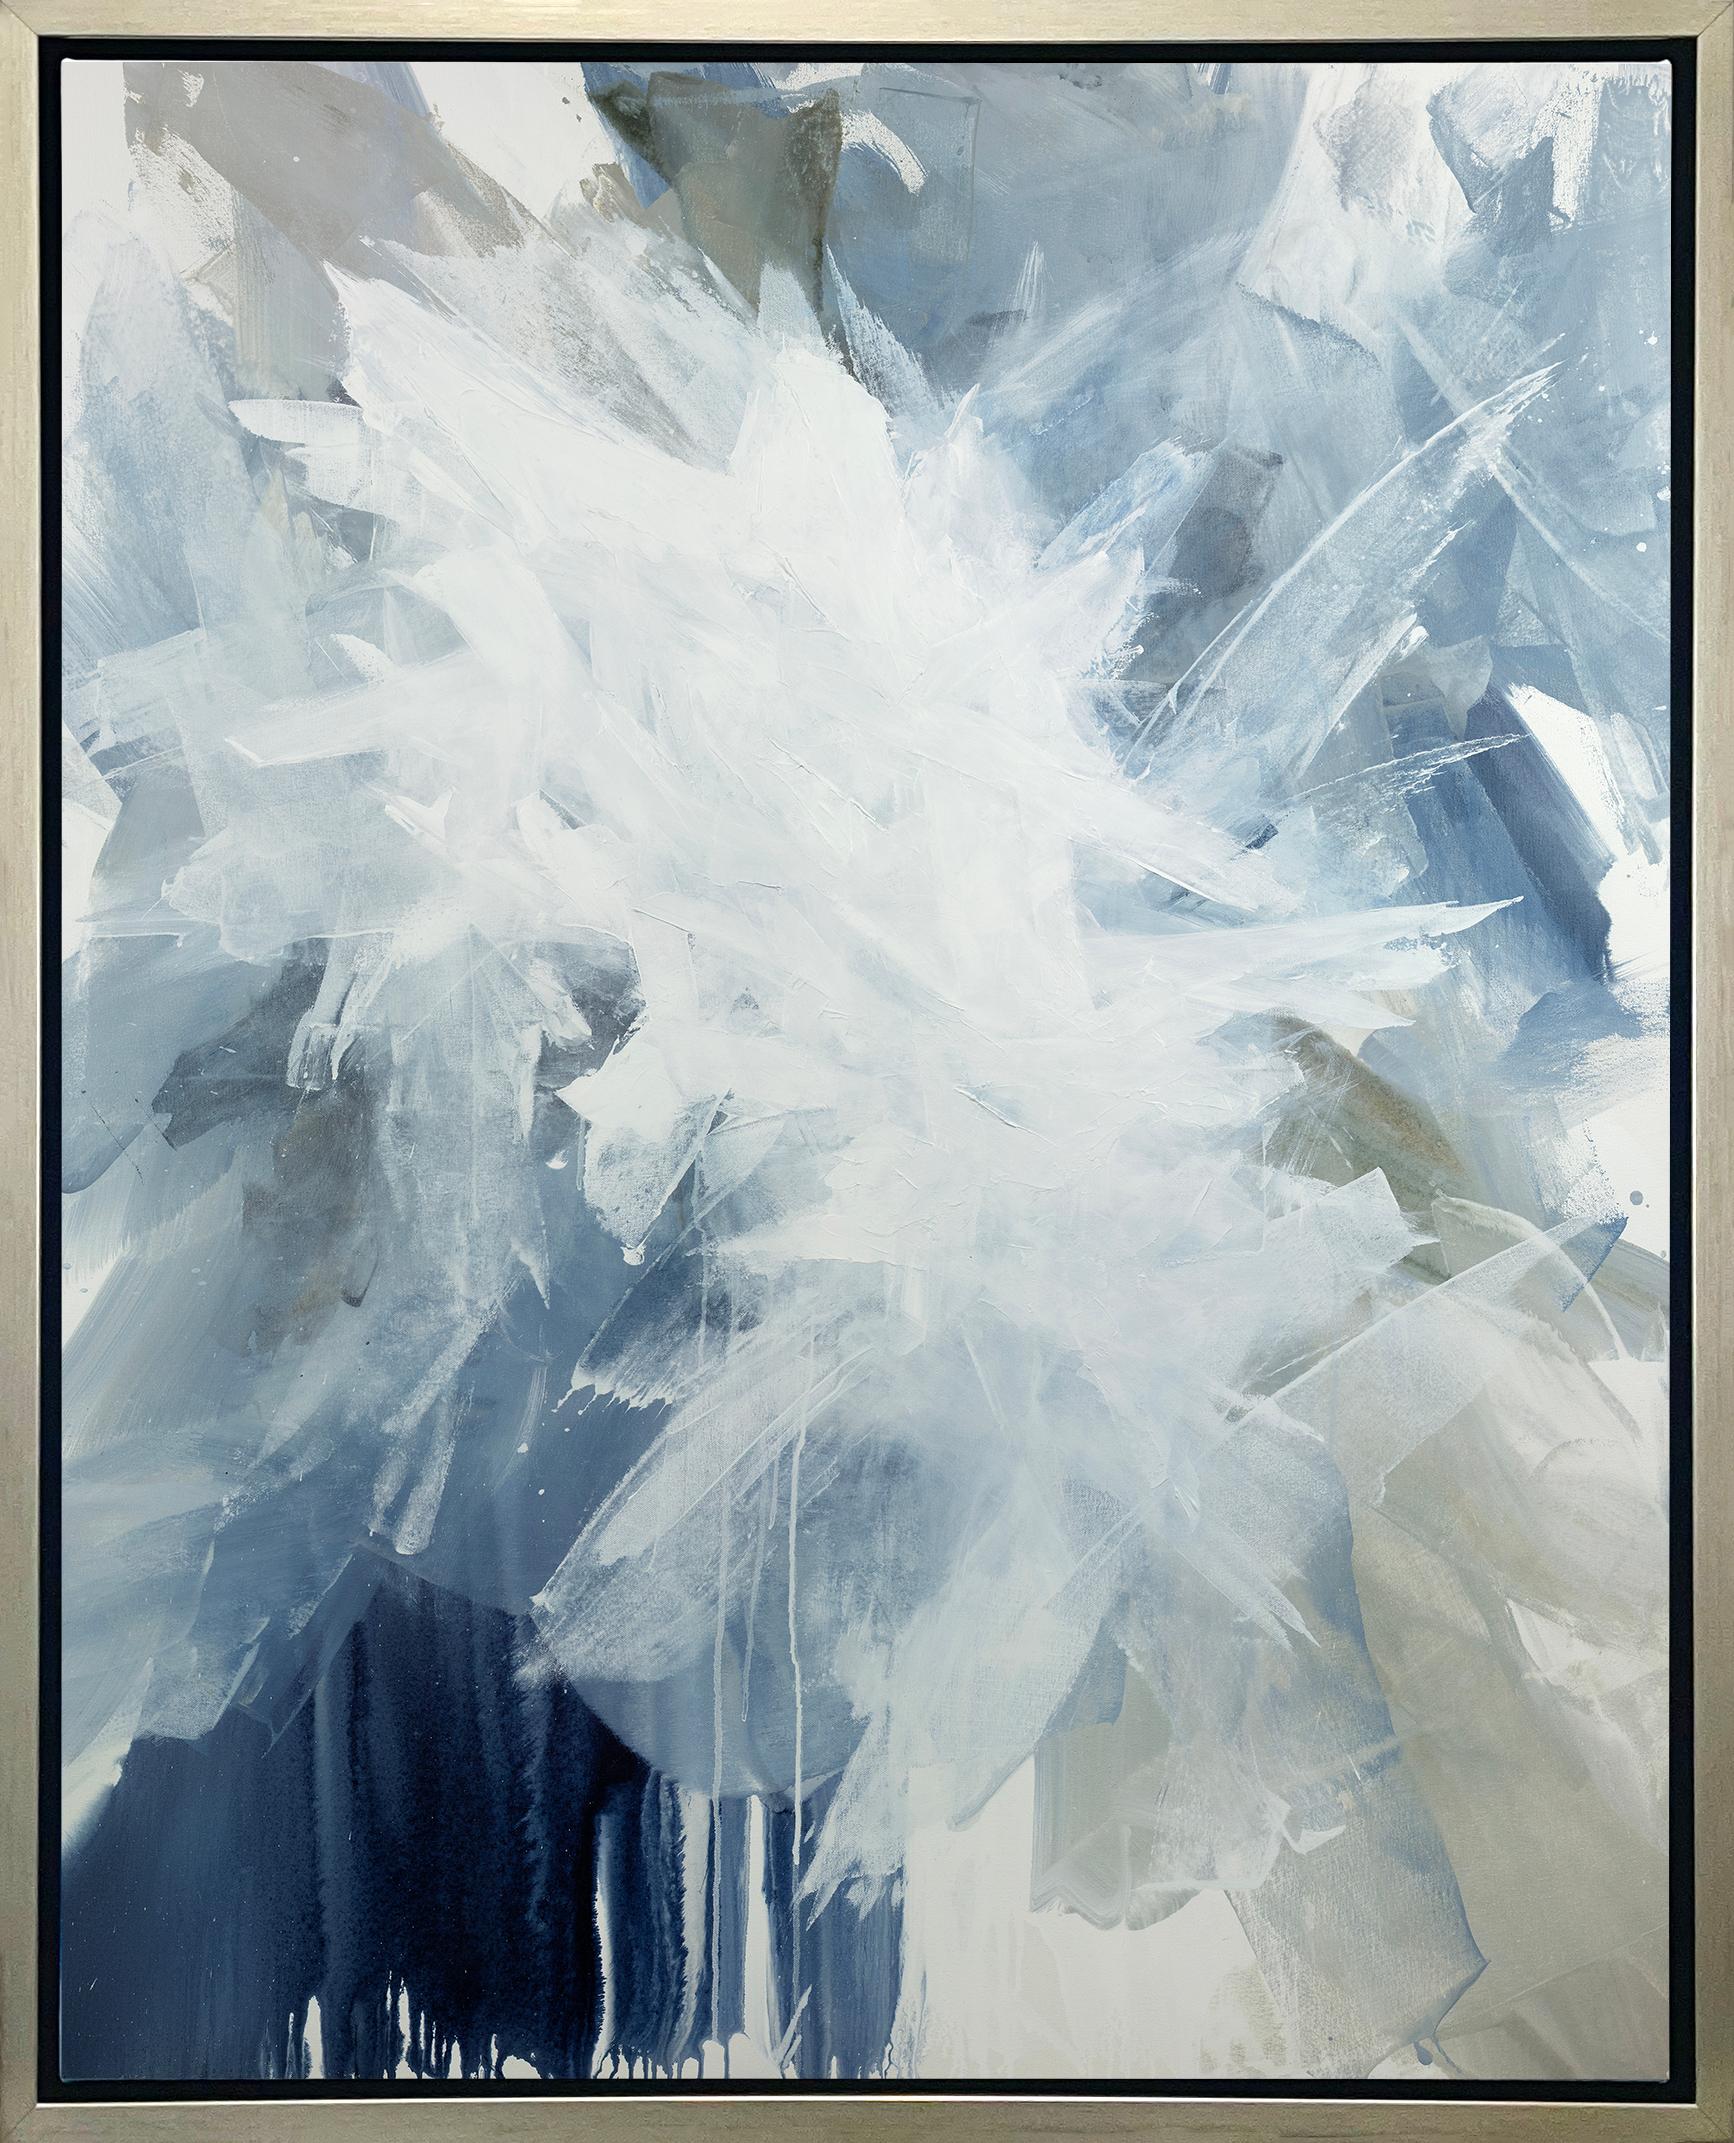 Teodora Guererra Abstract Print - "White Dove, " Framed Limited Edition Giclee Print, 50" x 40"